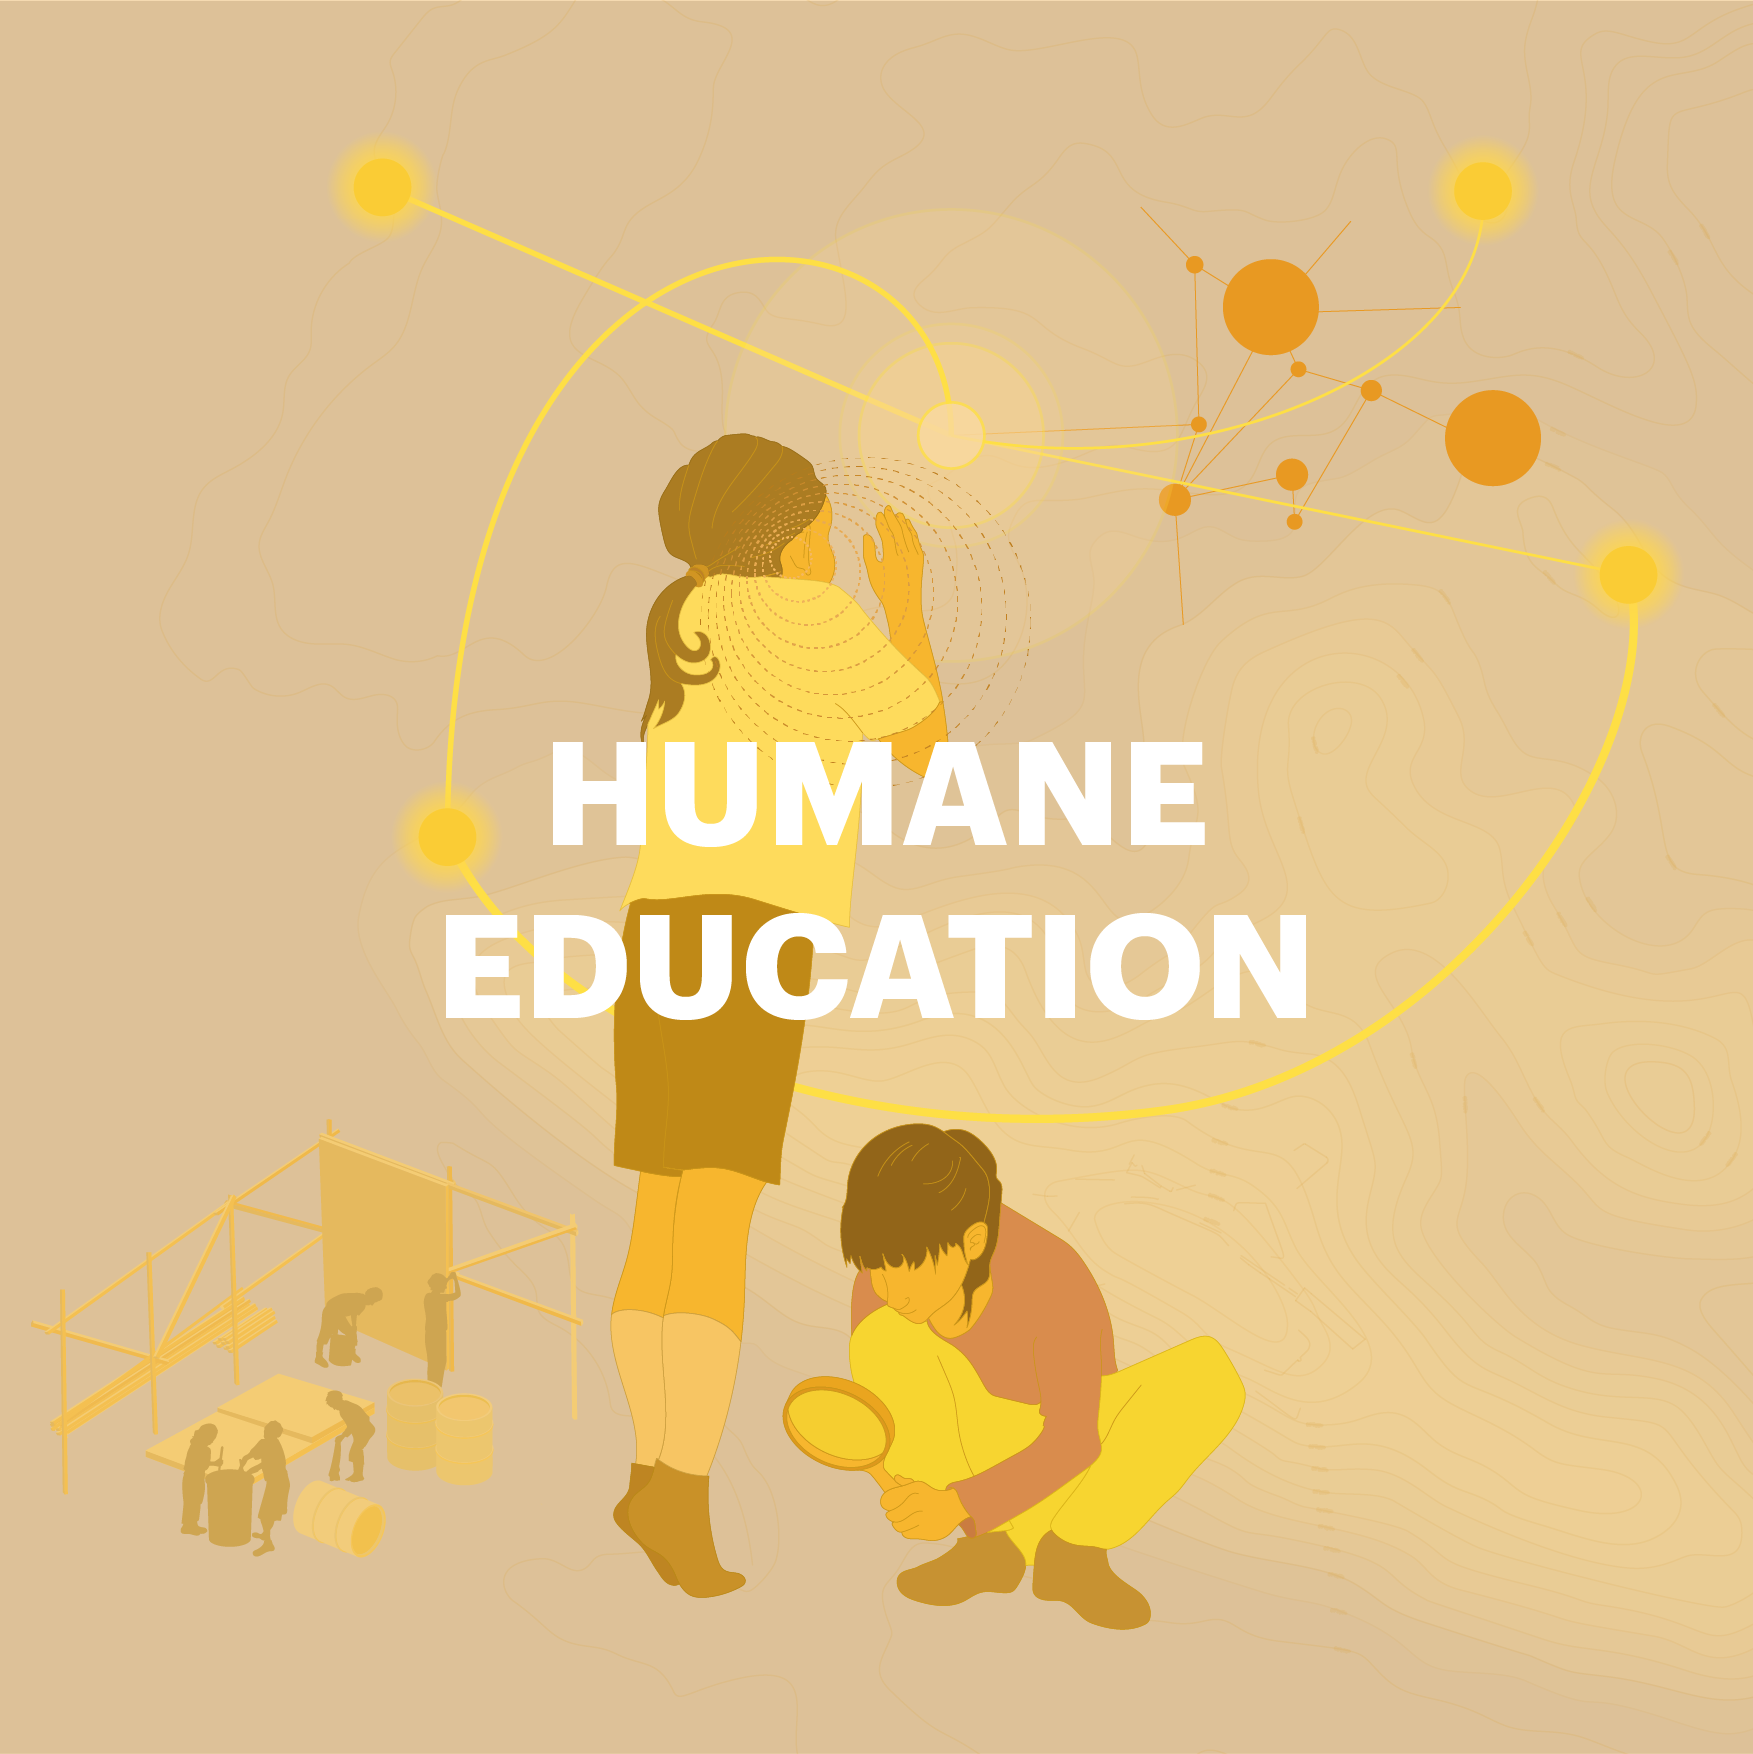 What if education valued and cultivated our ‘humane’ capacities so that the new generation could become active, global and open-minded citizens of the future?